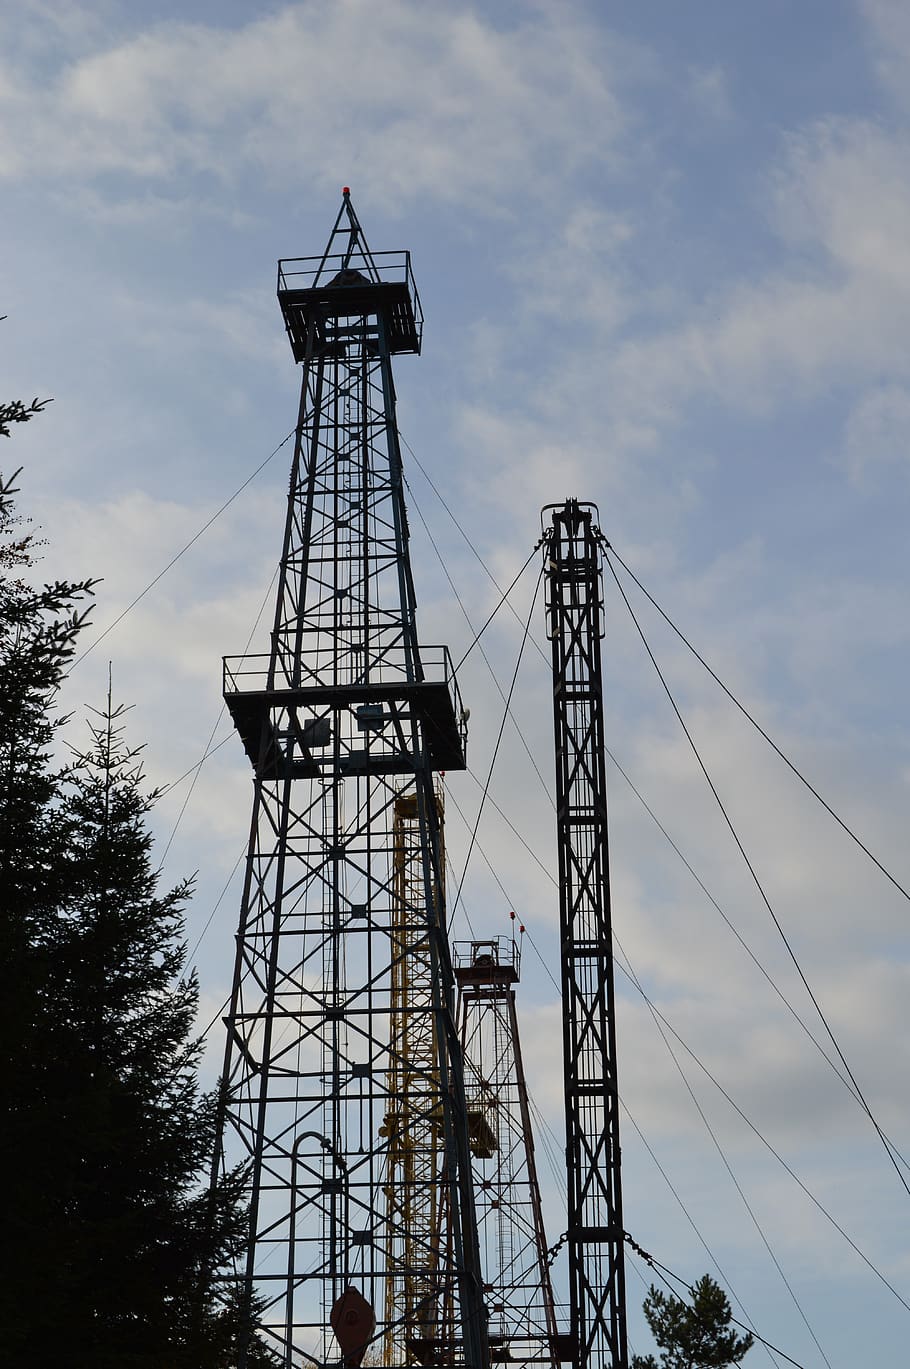 bóbrka, nafta, tower, machine, drilling rig, extraction, mineral, poland, carpathian, geology